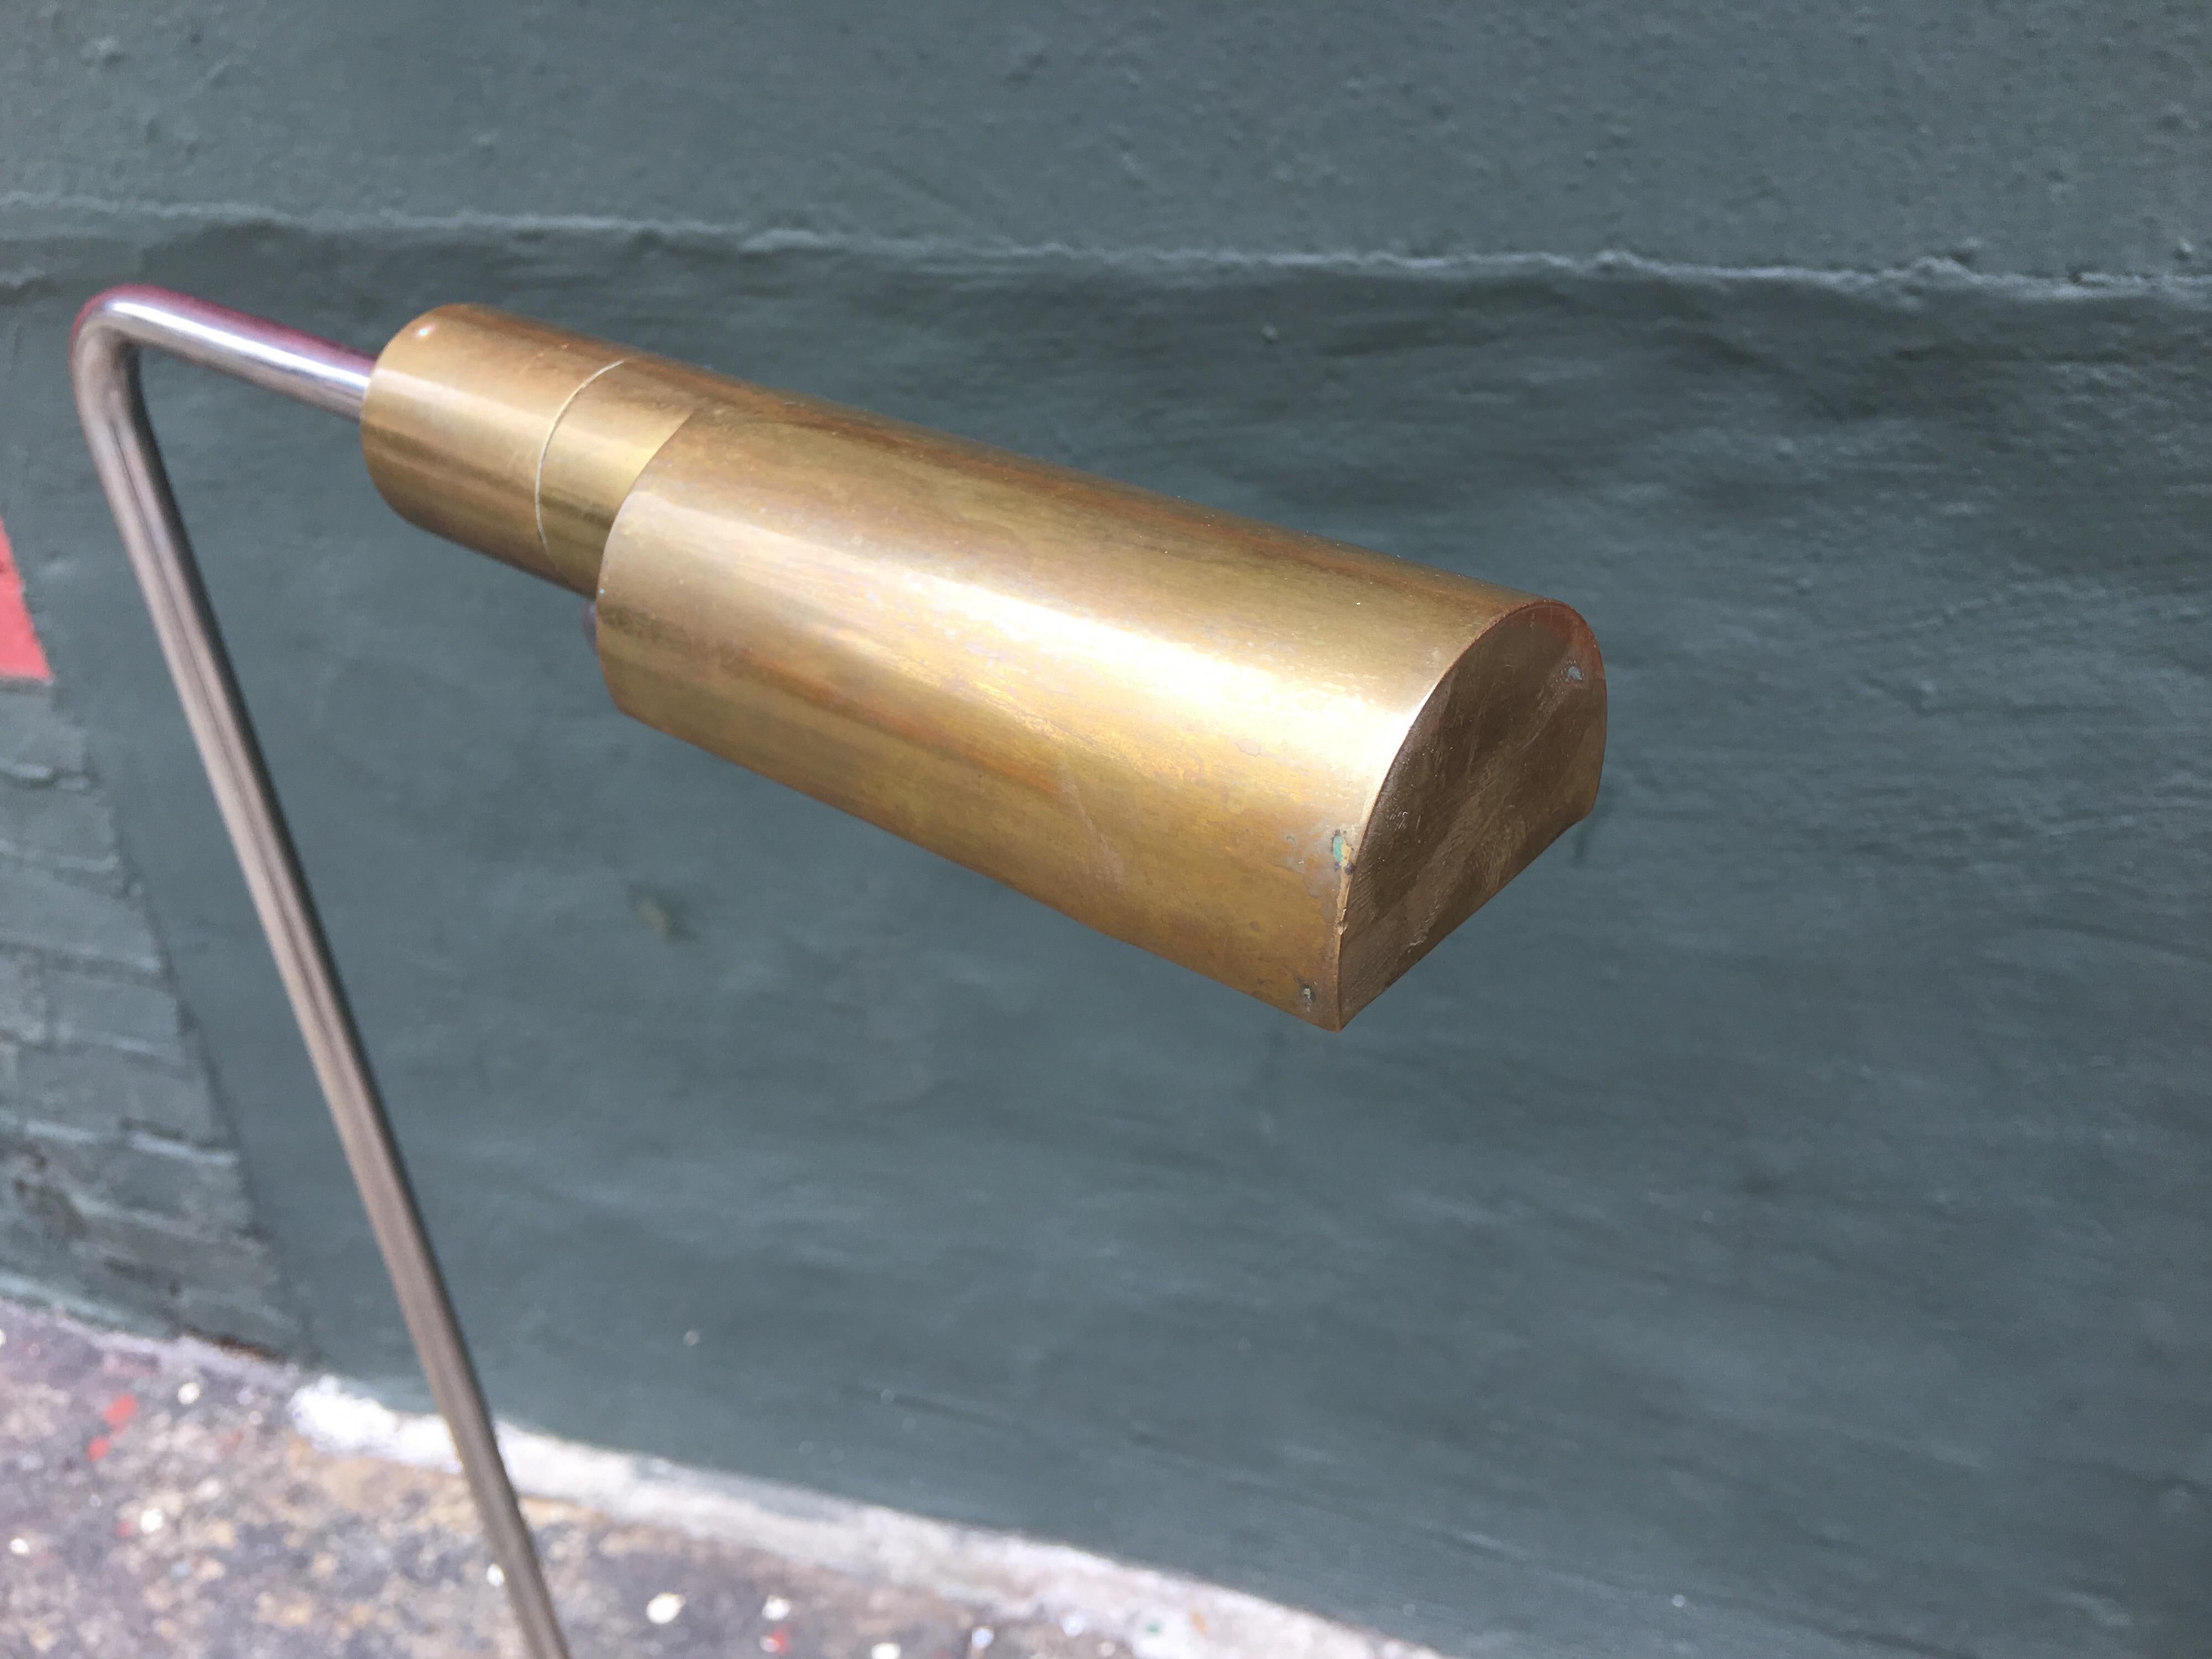 Cedric Hartman floor lamp with solid brass canopy and base, acrylic dimmer switch, and chrome support stem. Canopy swivels 360 degrees as does support stem. Brass has aged to a beautiful patina.